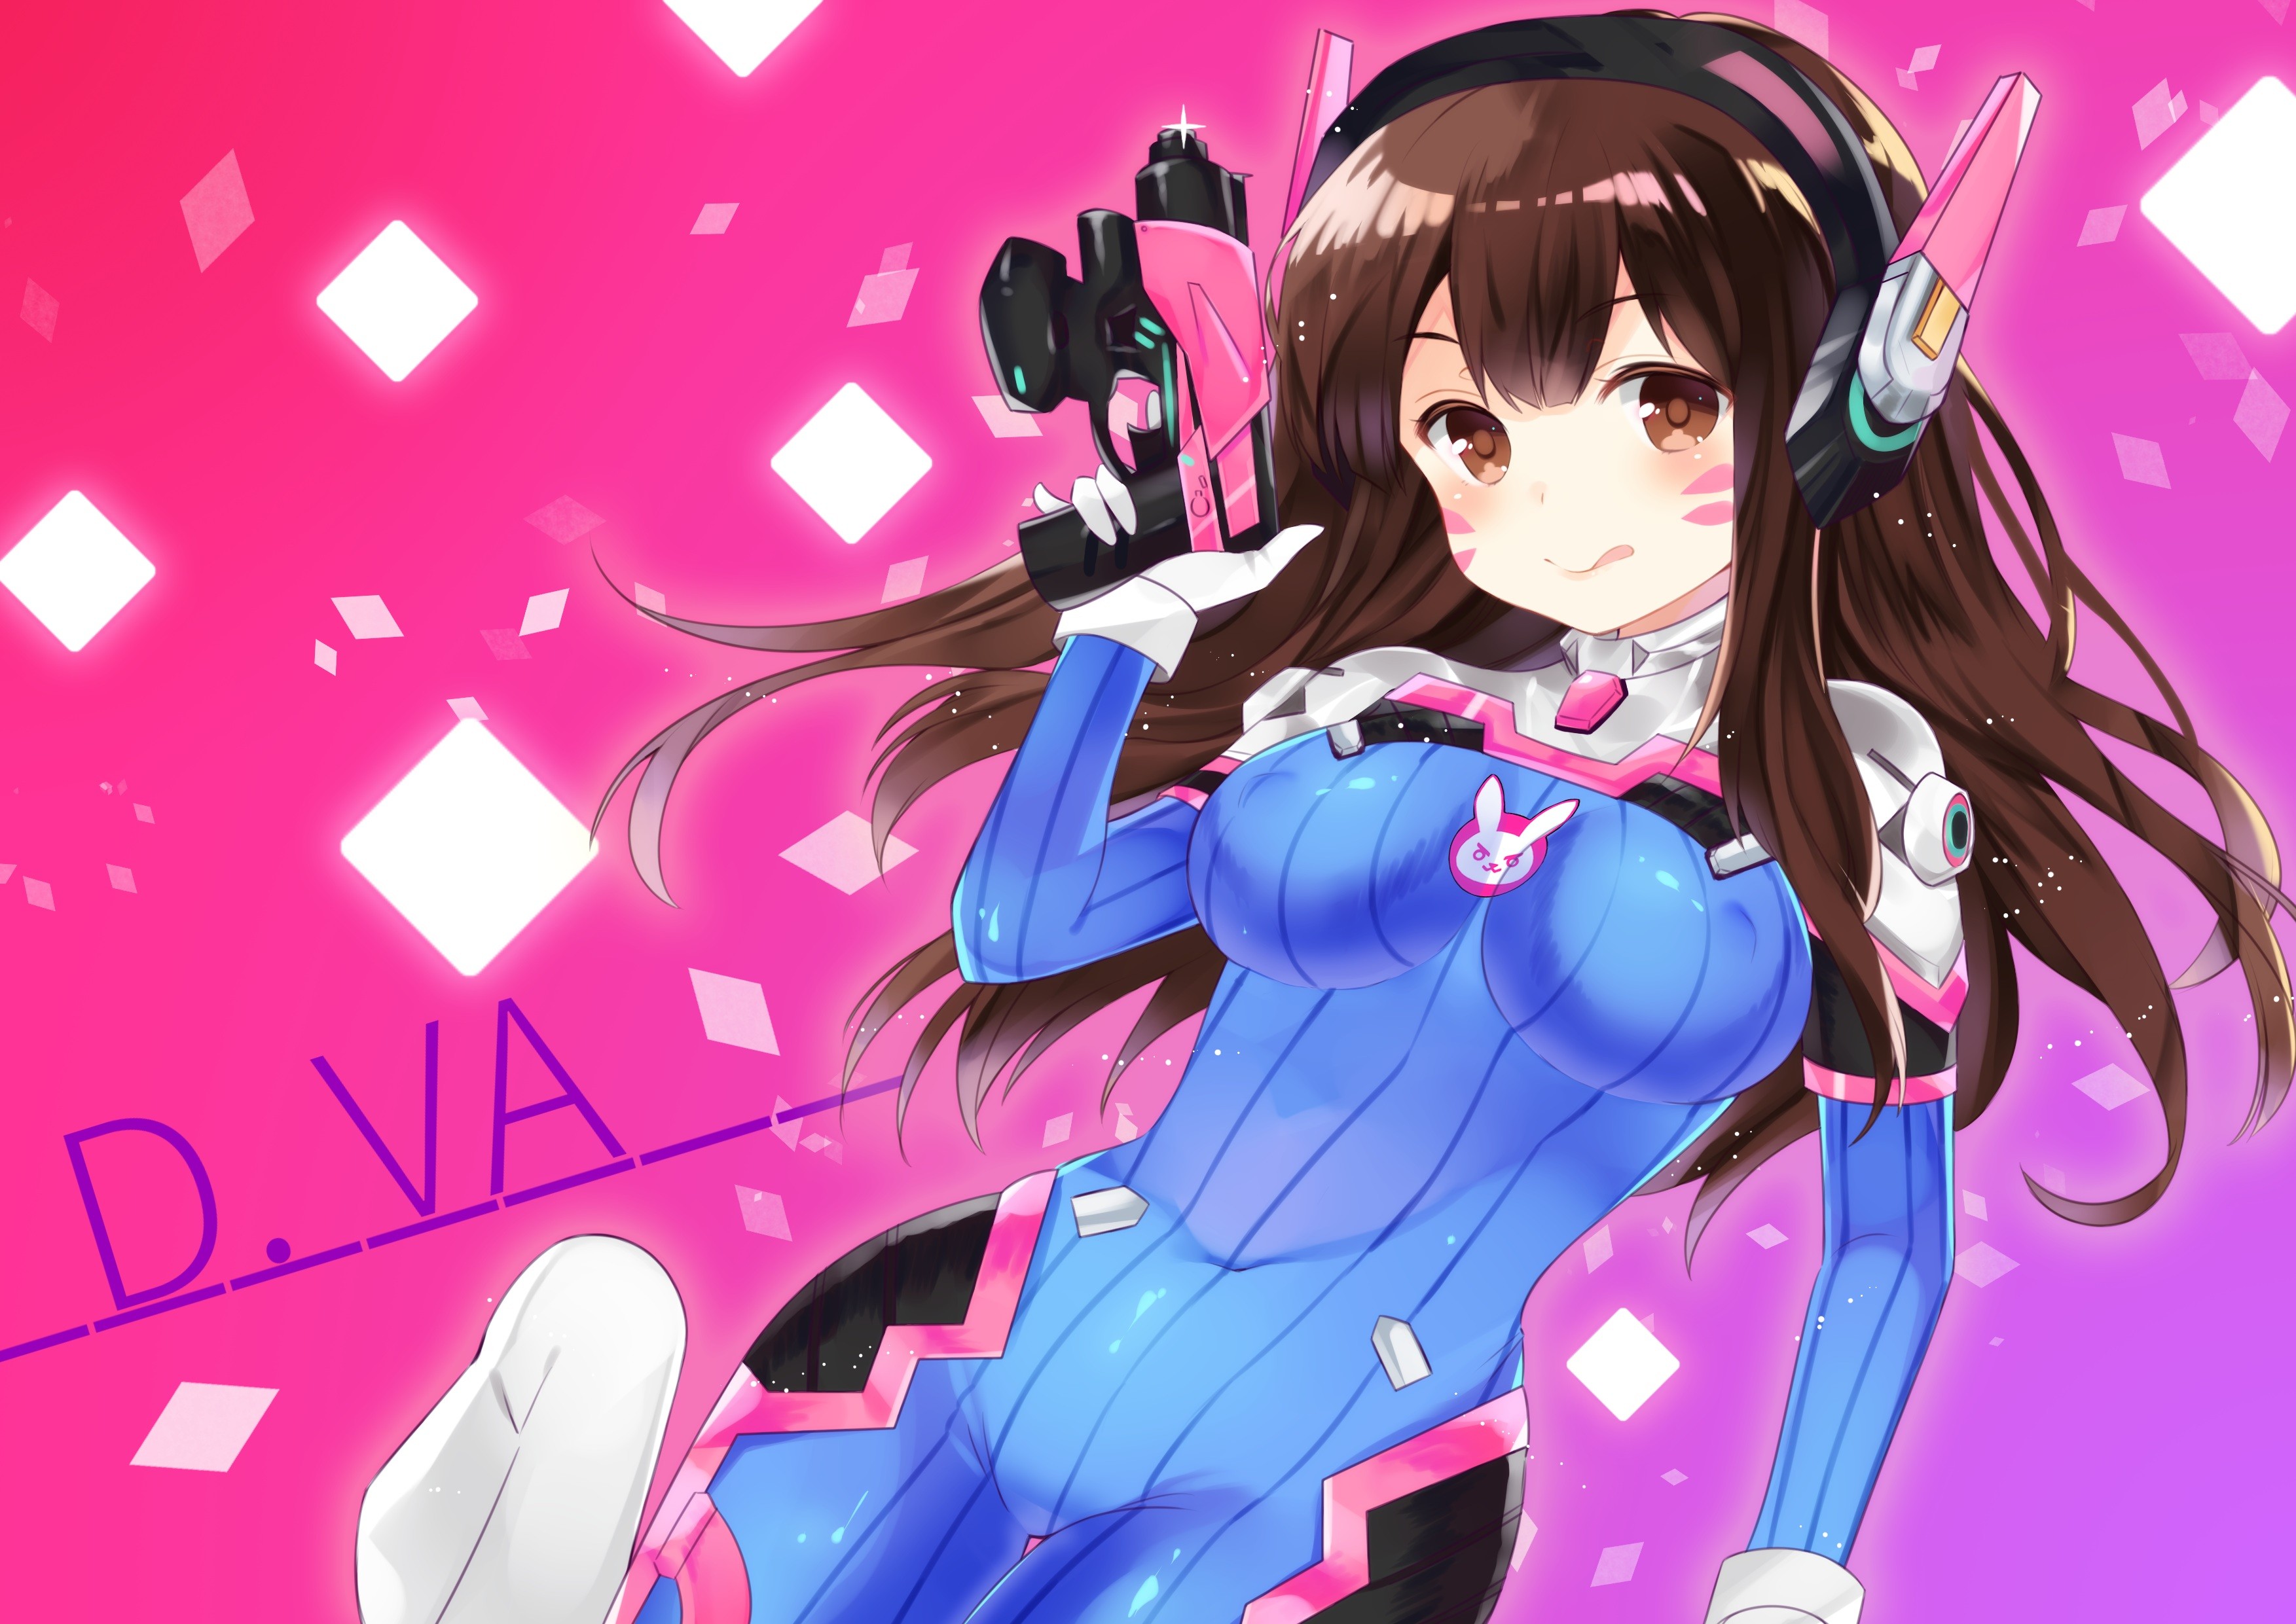 Anime 3507x2481 anime anime girls Overwatch D.Va (Overwatch) bodysuit gun headphones brunette brown eyes PC gaming girls with guns boobs tongue out long hair video game girls fan art Pixiv video game characters